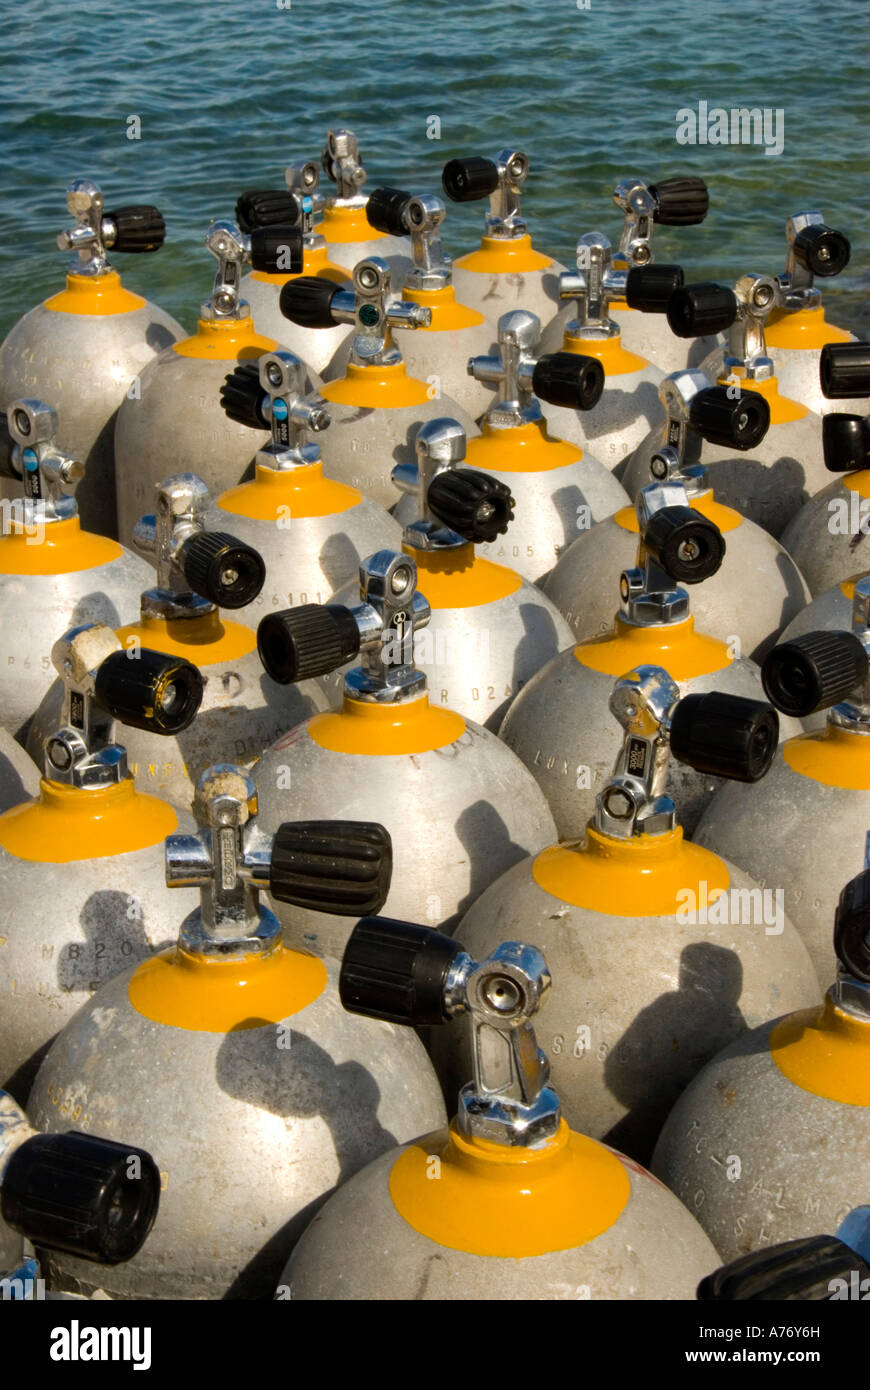 Scuba sport diving steel compressed air tanks Stock Photo